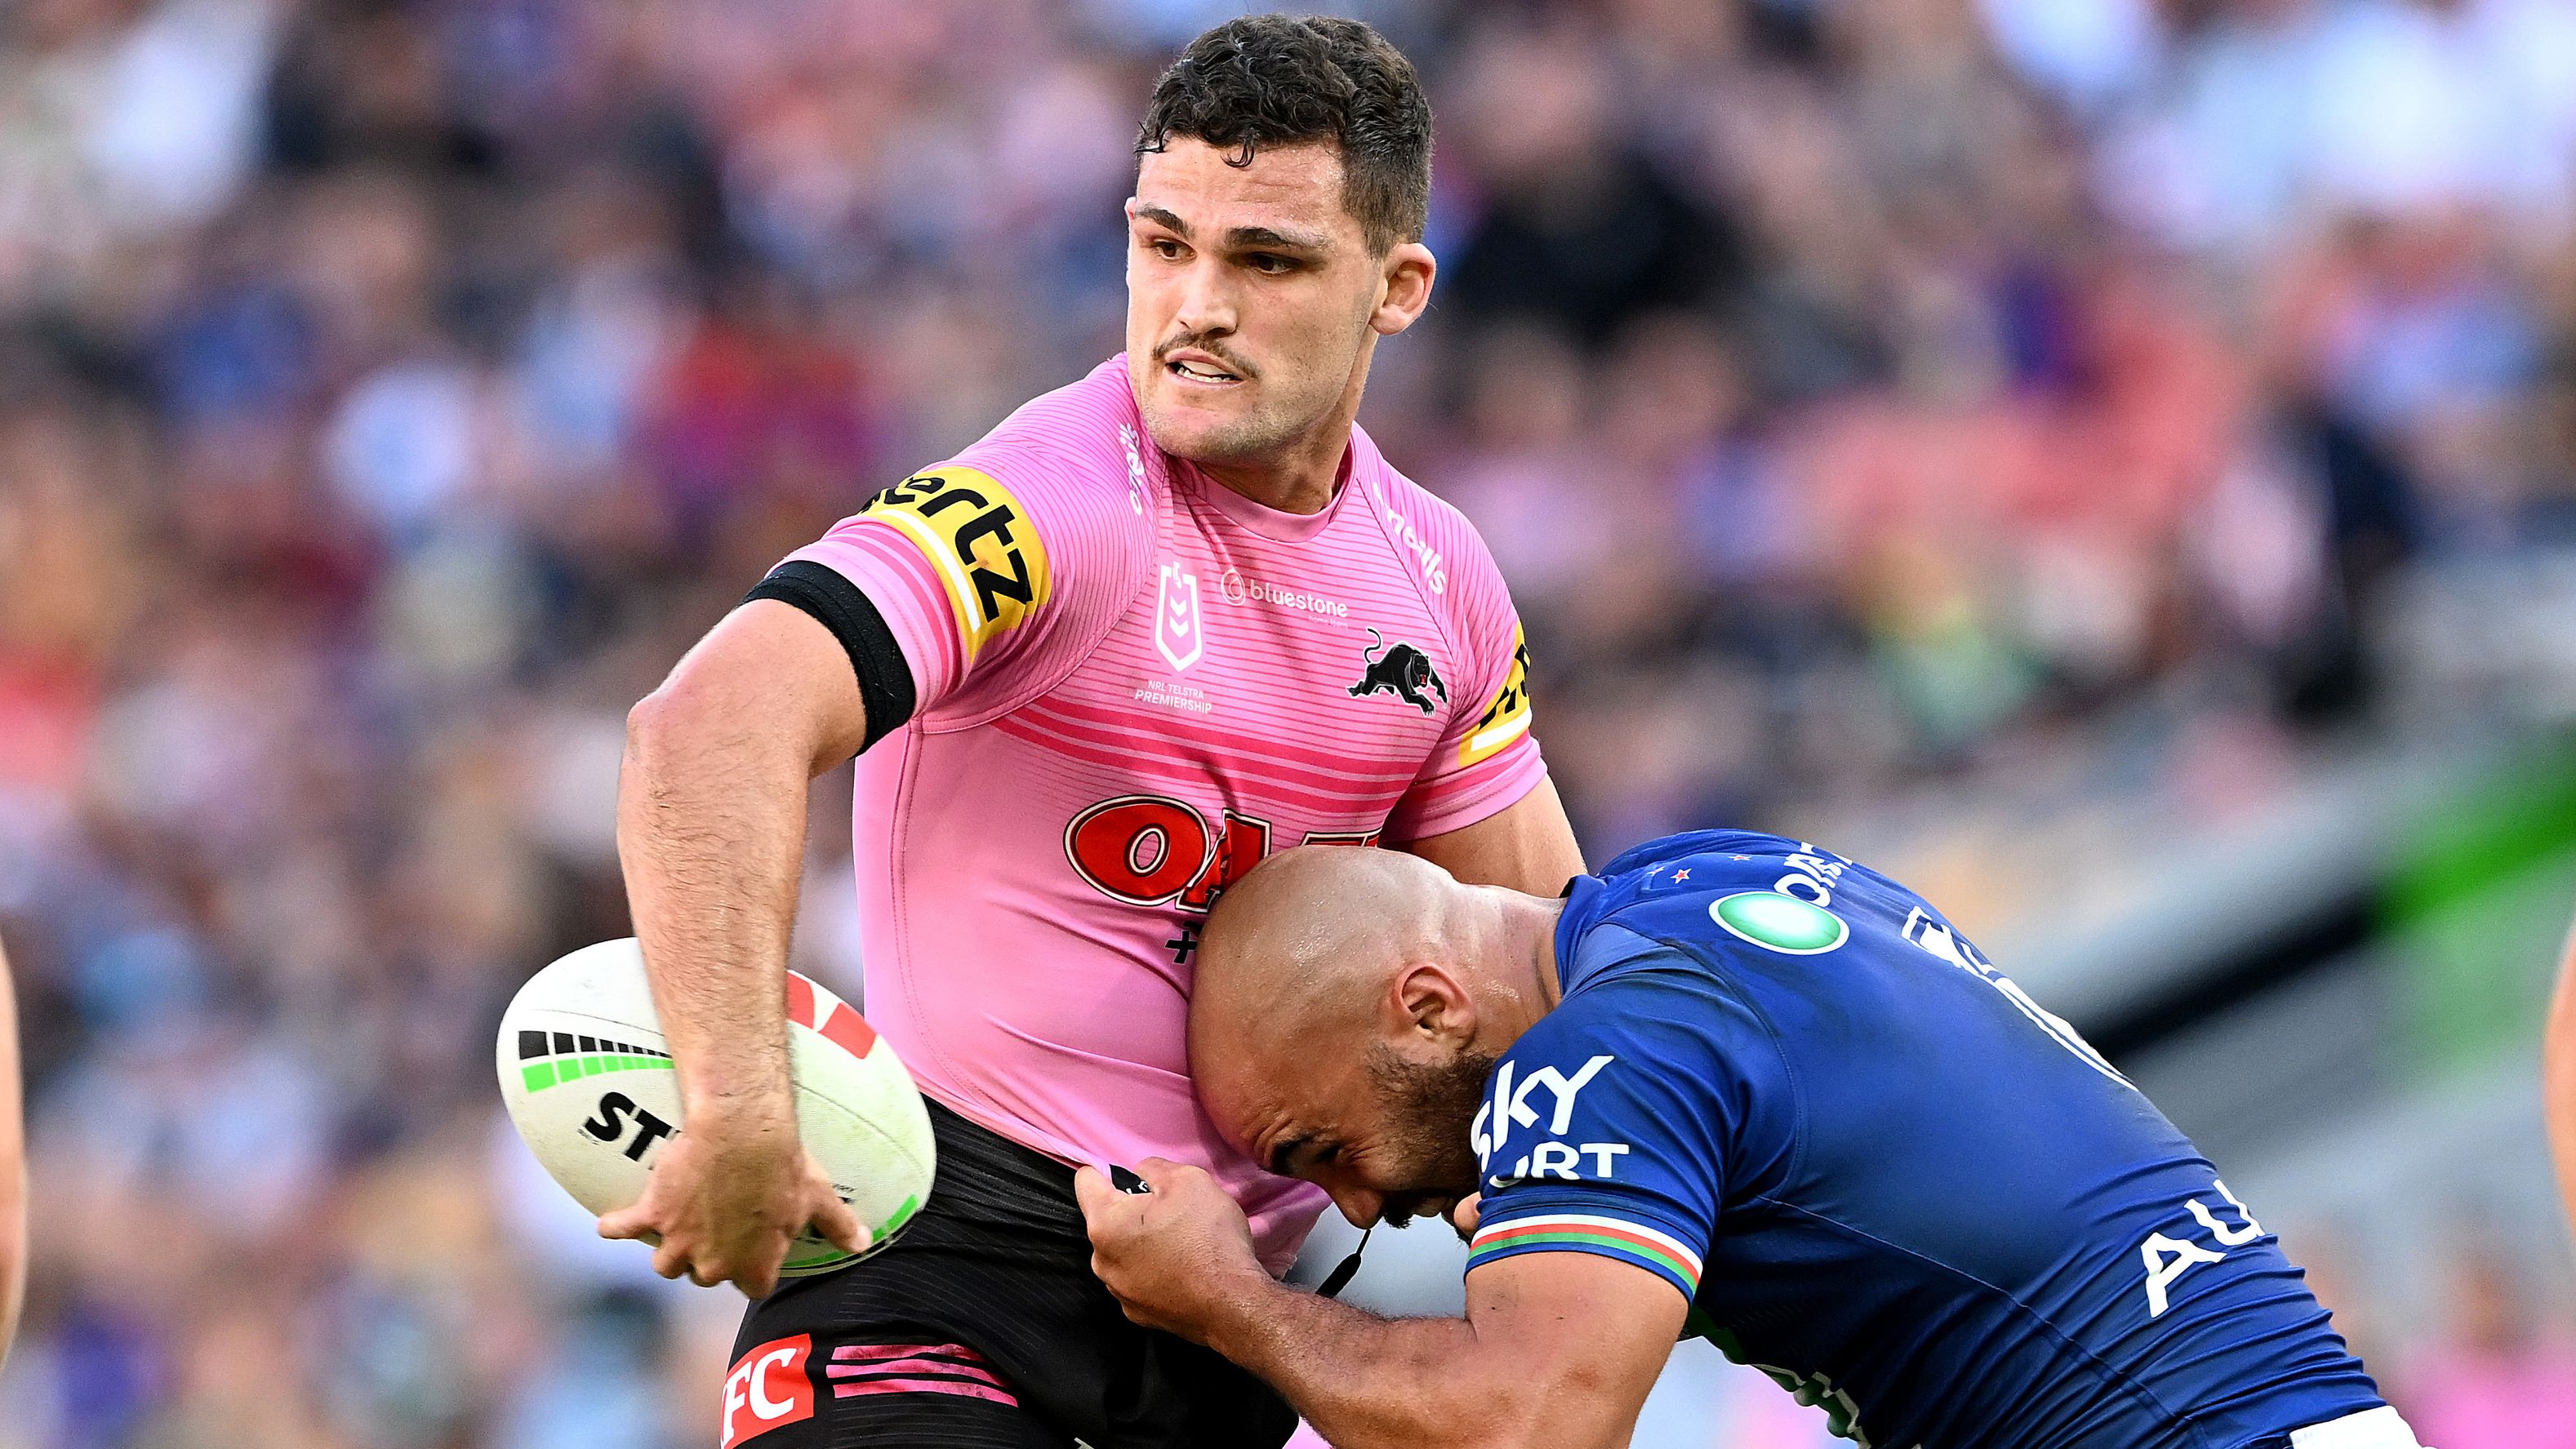 Nathan Cleary of the Panthers looks to offload during the round 10 NRL match between the New Zealand Warriors and Penrith Panthers at Suncorp Stadium on May 06, 2023 in Brisbane, Australia. (Photo by Bradley Kanaris/Getty Images)